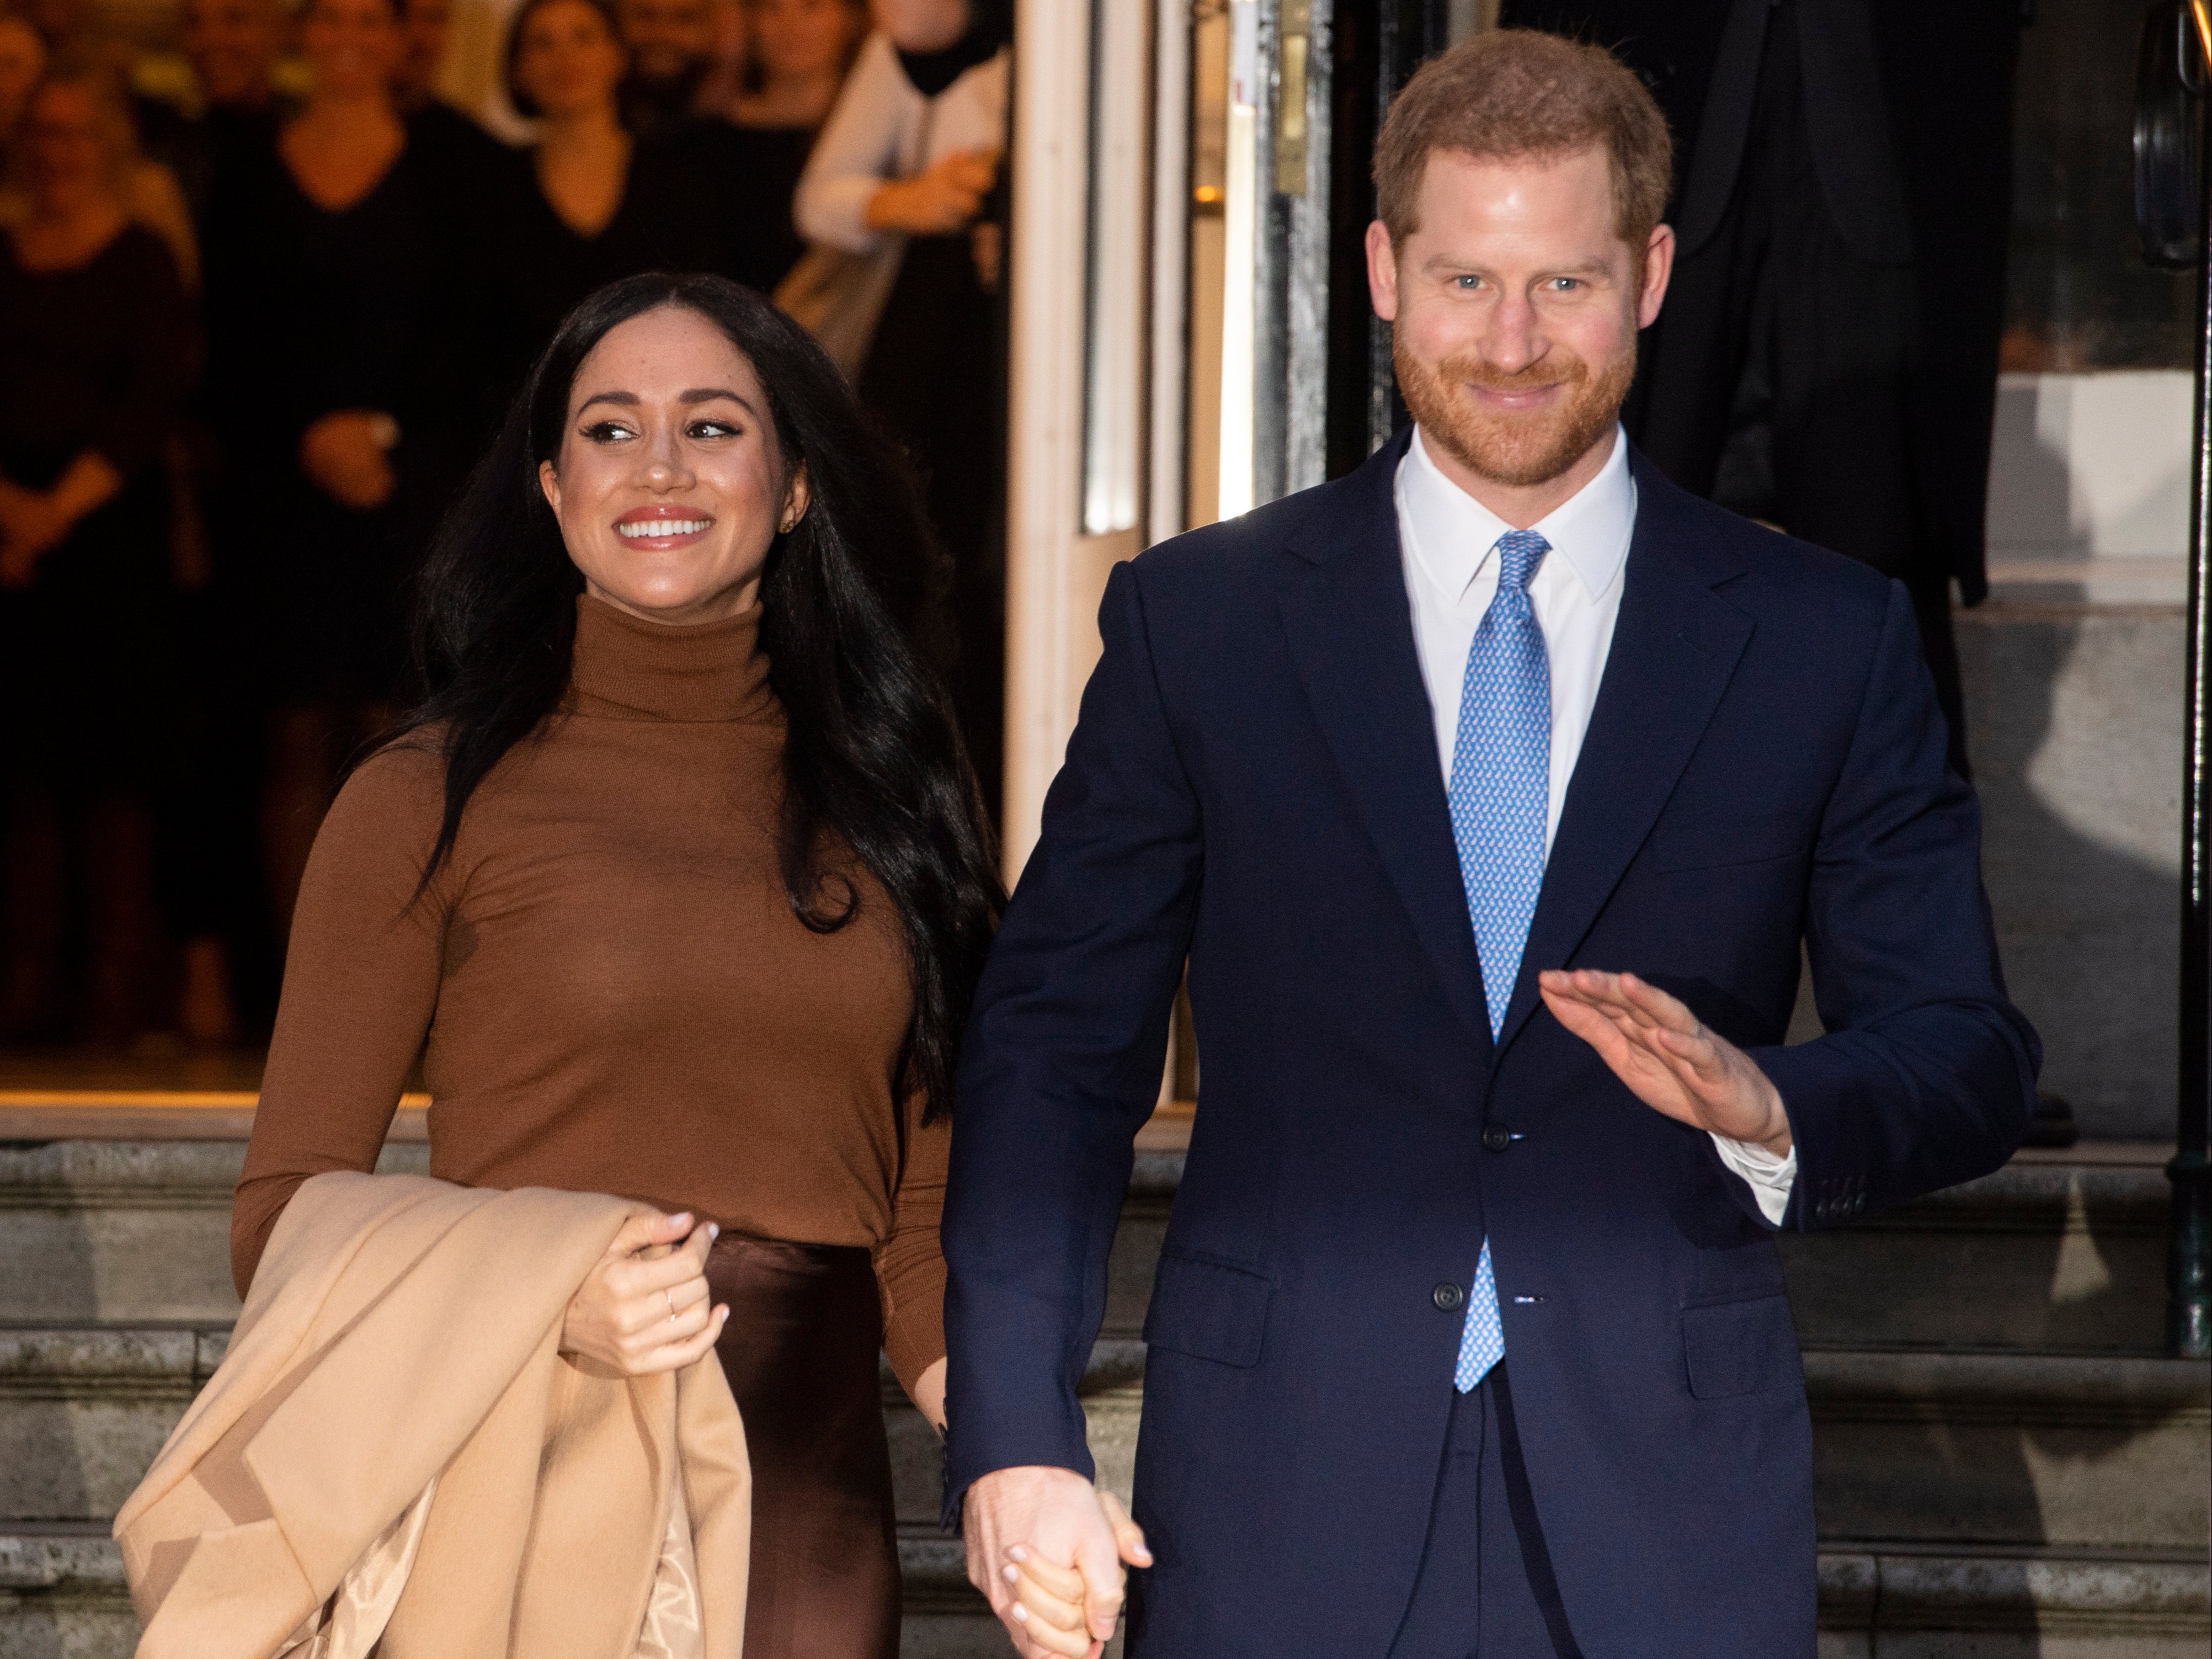 Harry and Meghan announced the pregnancy days after the Duchess won a privacy case against Associated Newspapers Limited